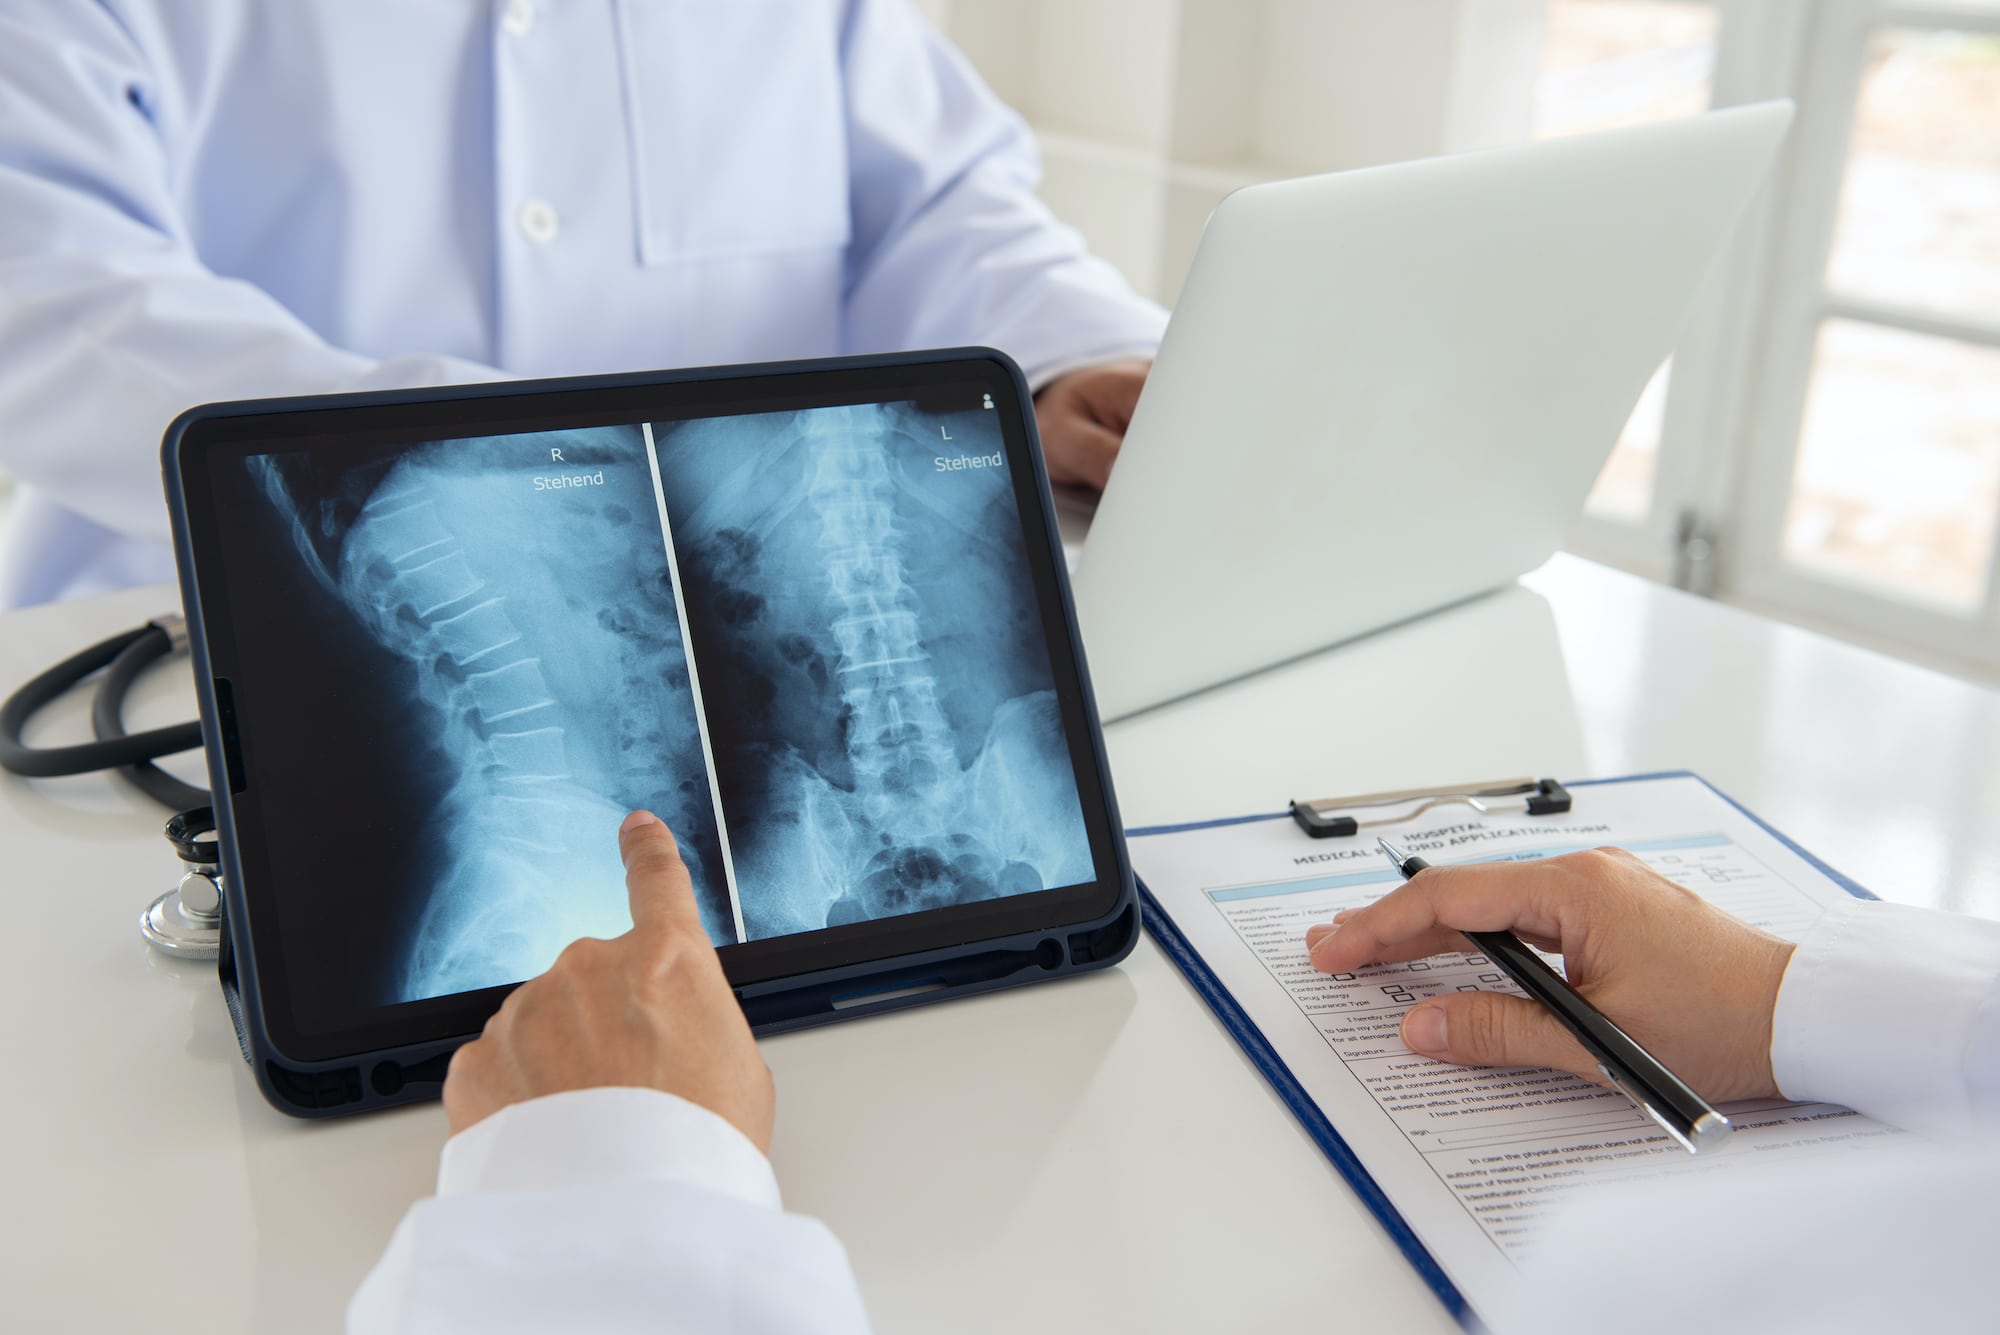 herniated disc injury lawyer cleveland